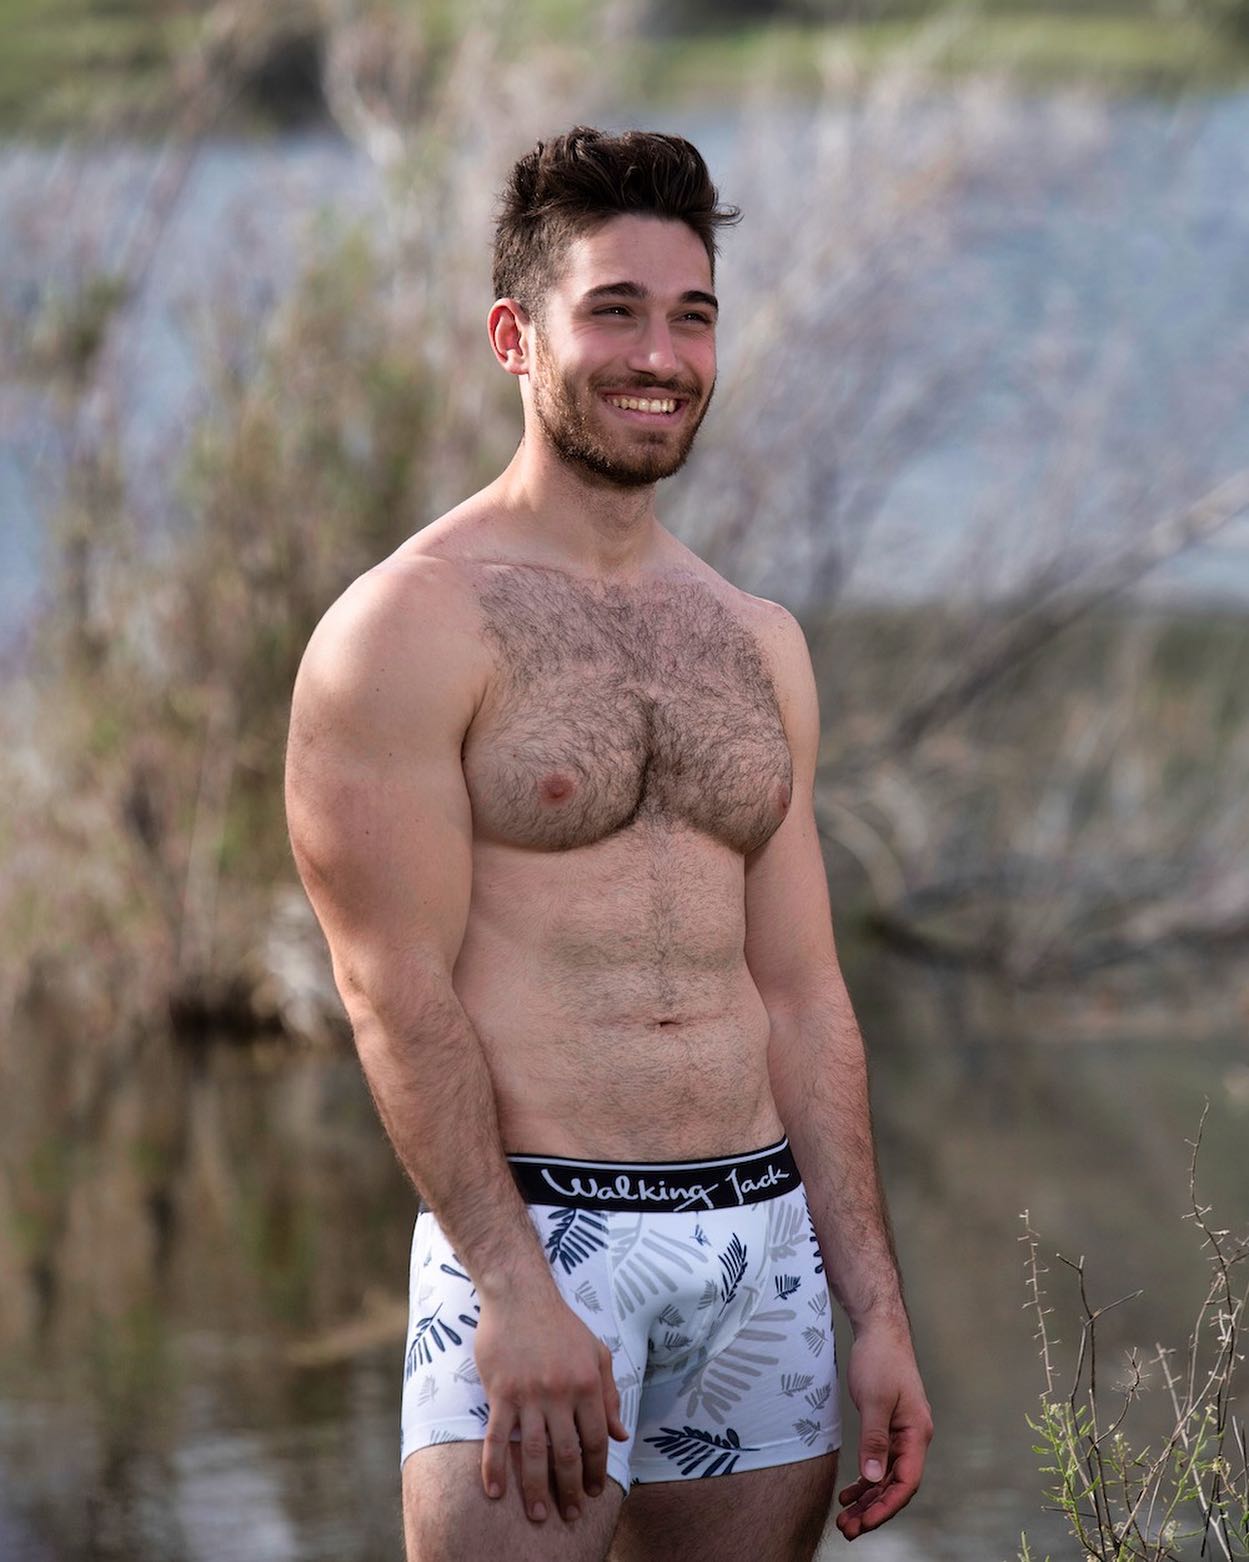 A unique print that goes perfectly with your best smile! Try on the Walking Jack Fern Trunks:
_____
https://menandunderwear.com/shop/underwear/walking-jack-fern-print-trunks